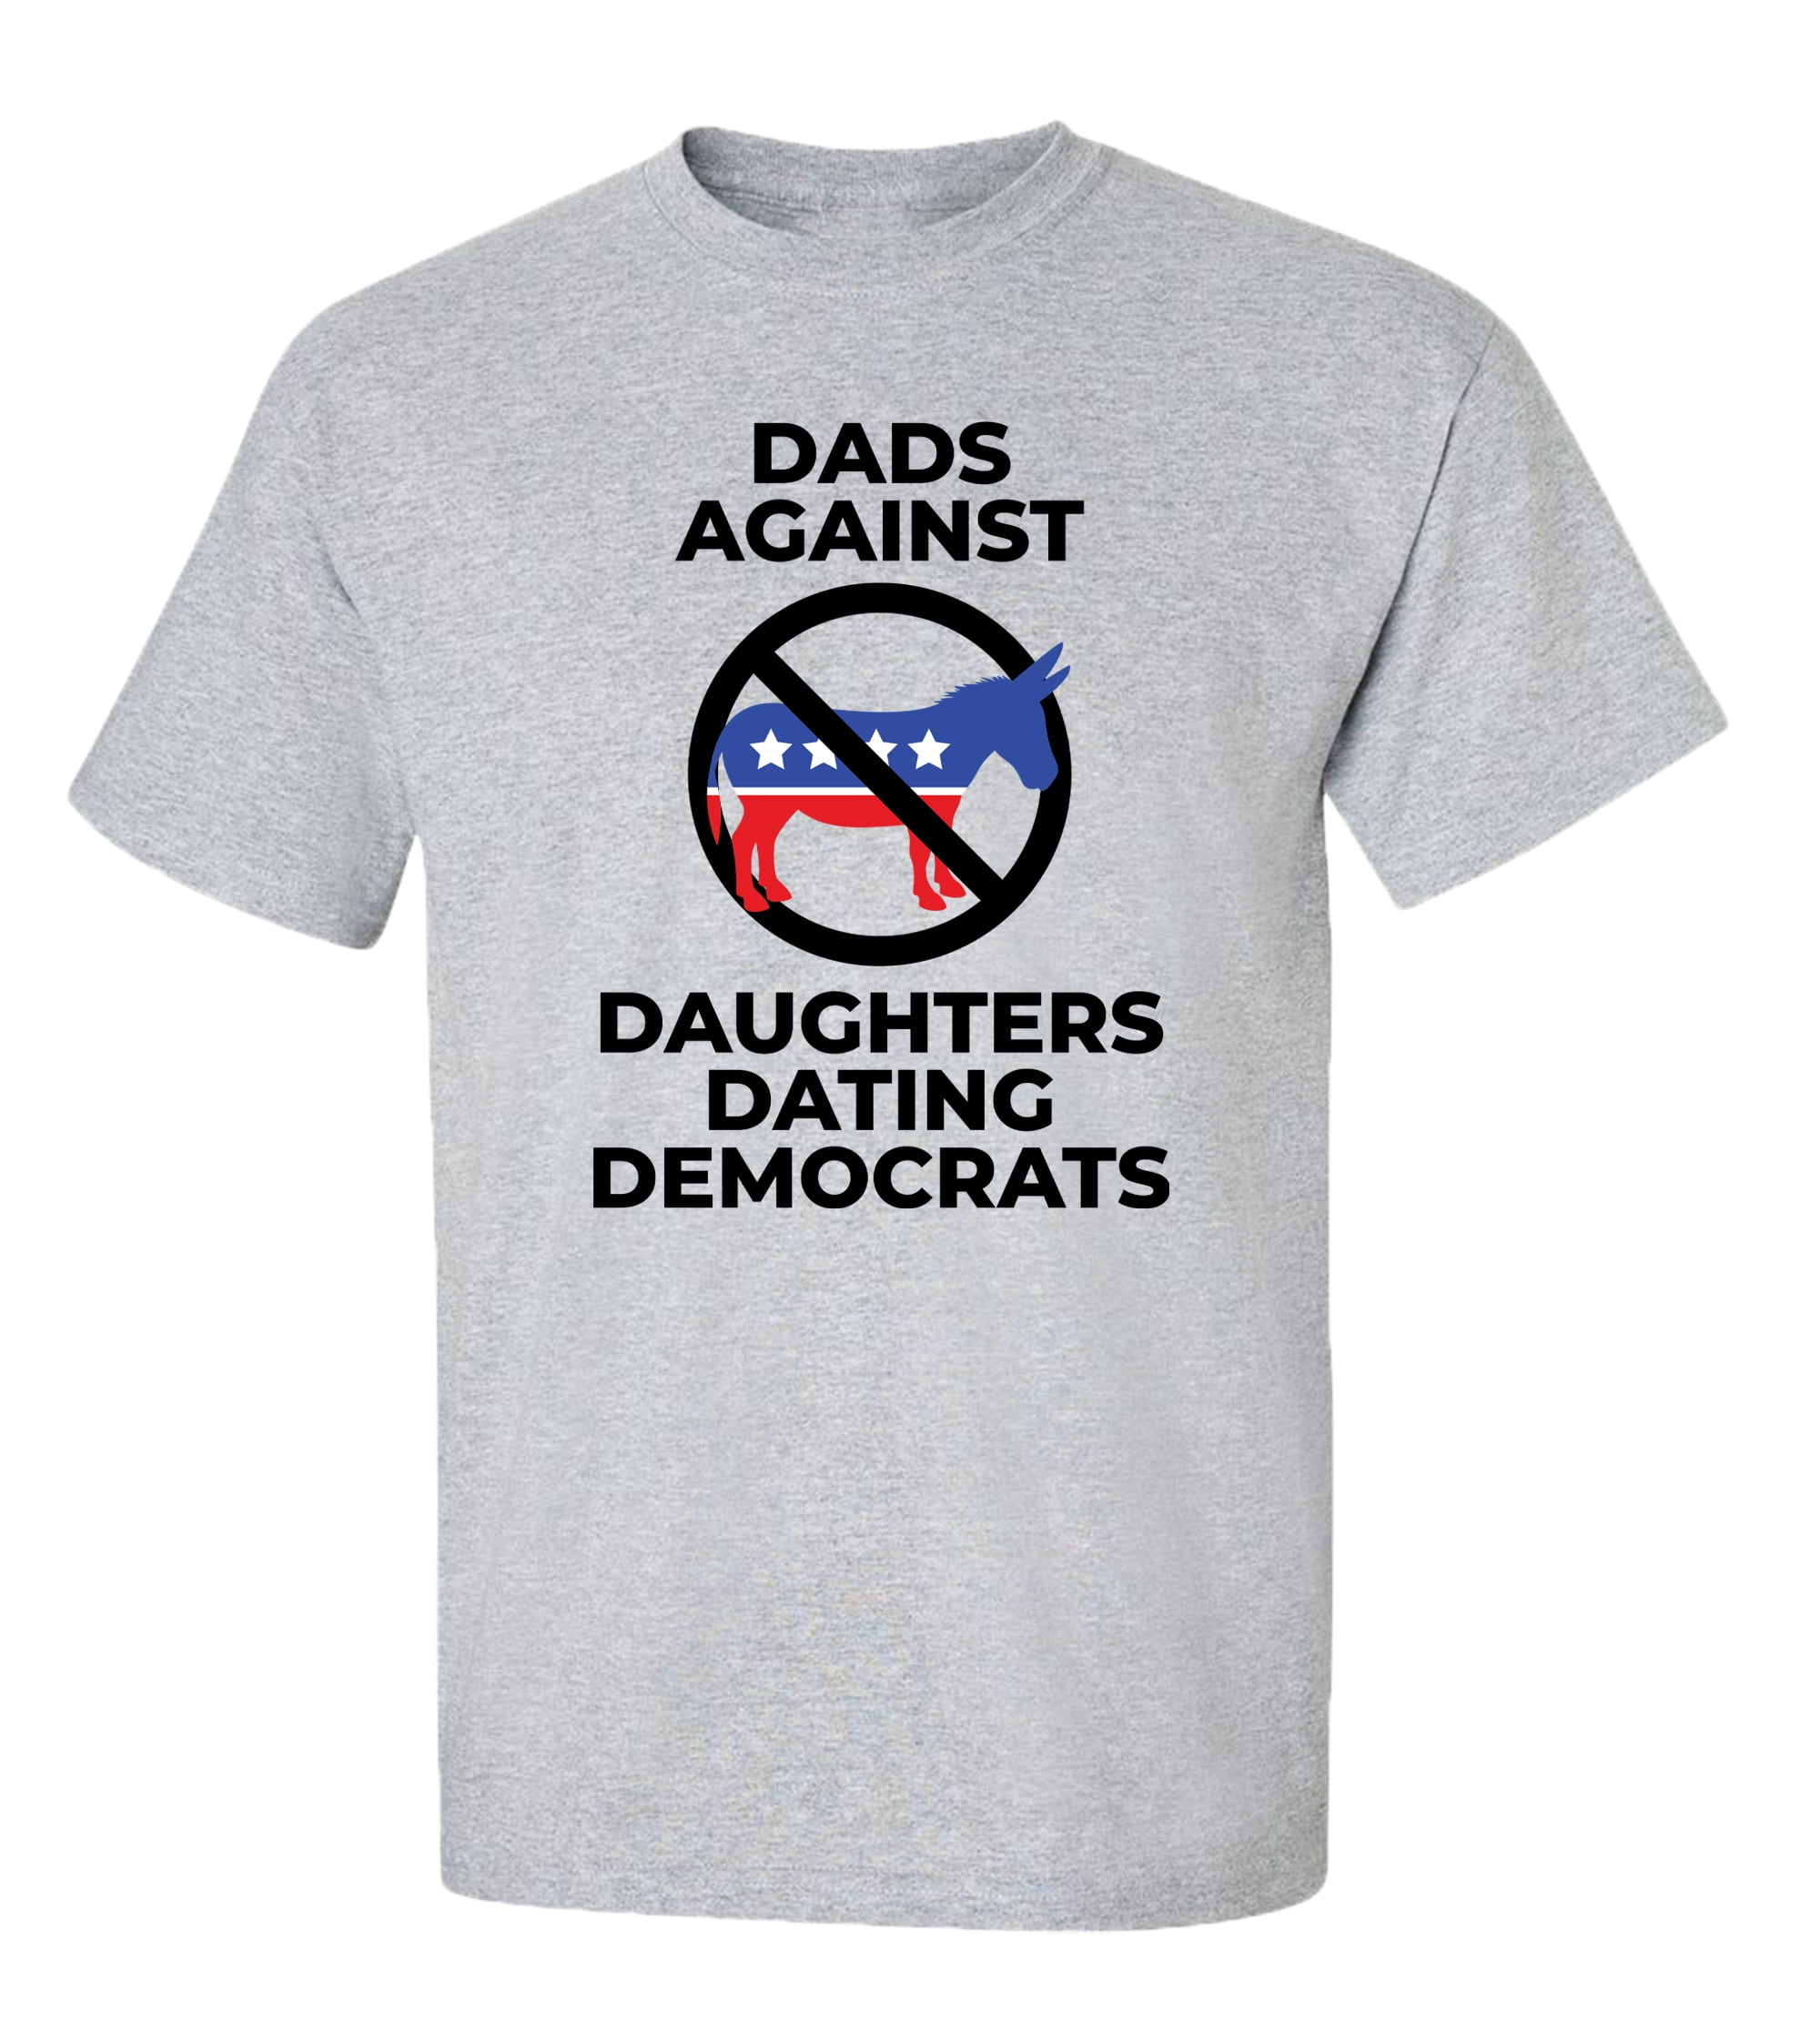 Funny Political Dads Against Daughters Dating Democrats Adult Short T -Shirt-Sports Gray-XXL - Walmart.com